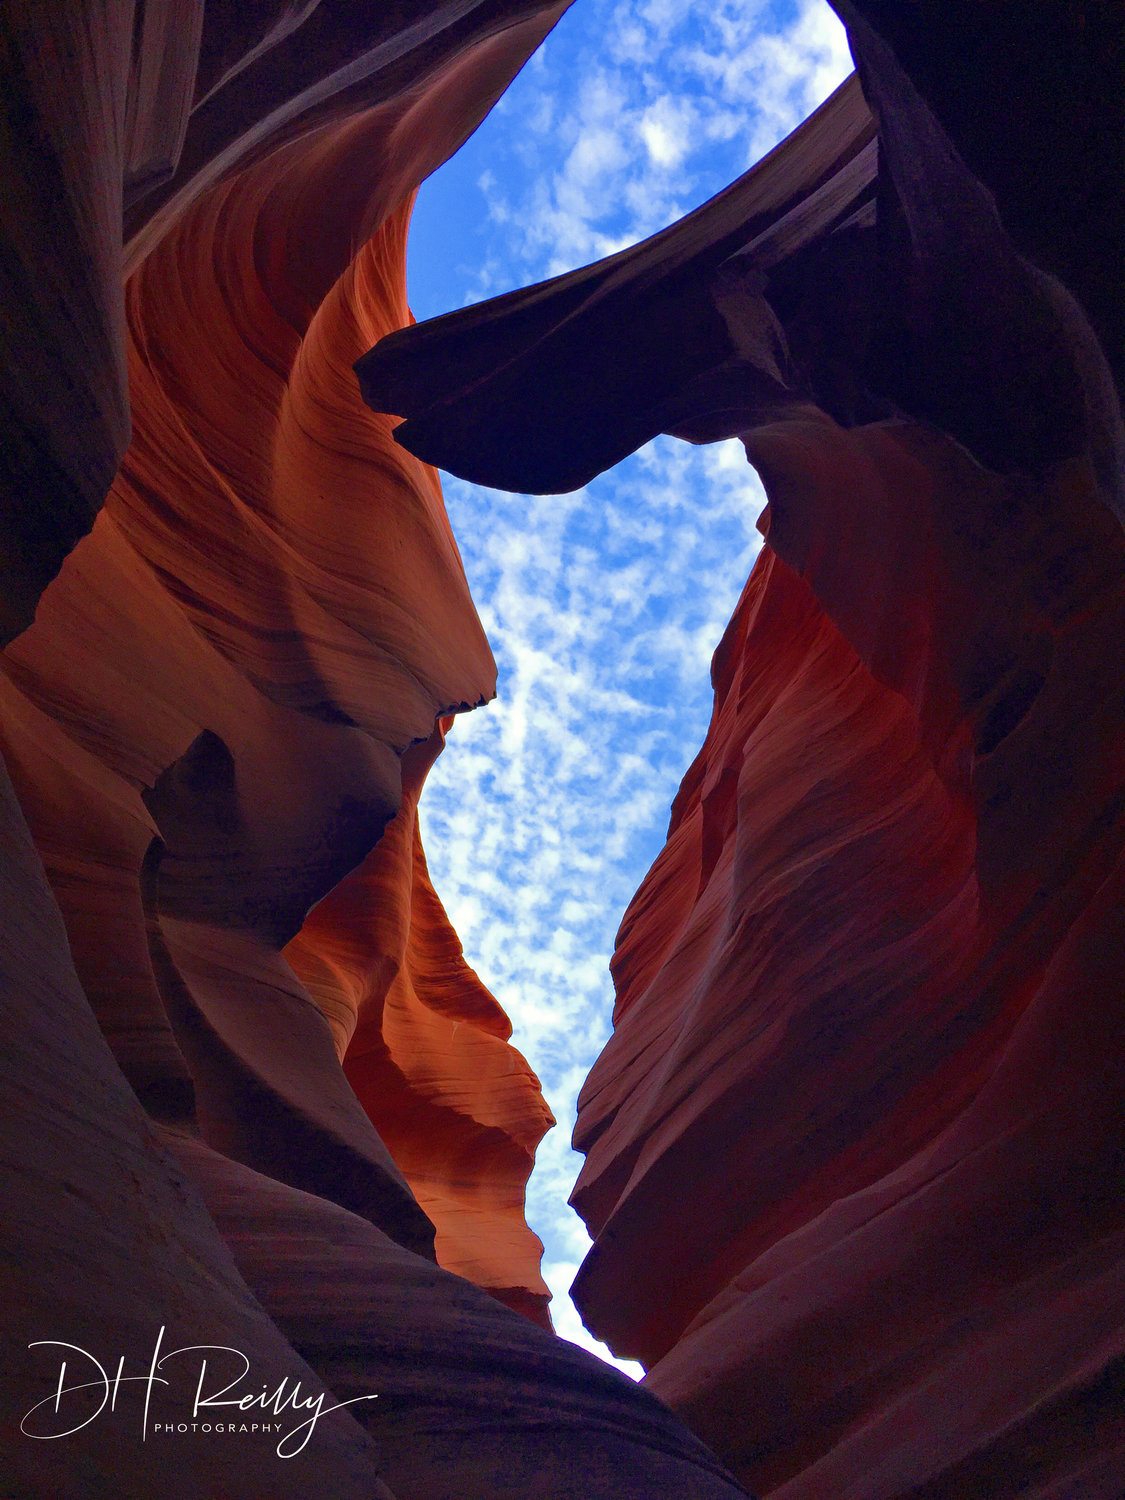 Reilly’s photograph, "Antelope Canyon" was awarded First Place at the Sky's The Limit juried photography show at the Long Island Photo Gallery in Islip.